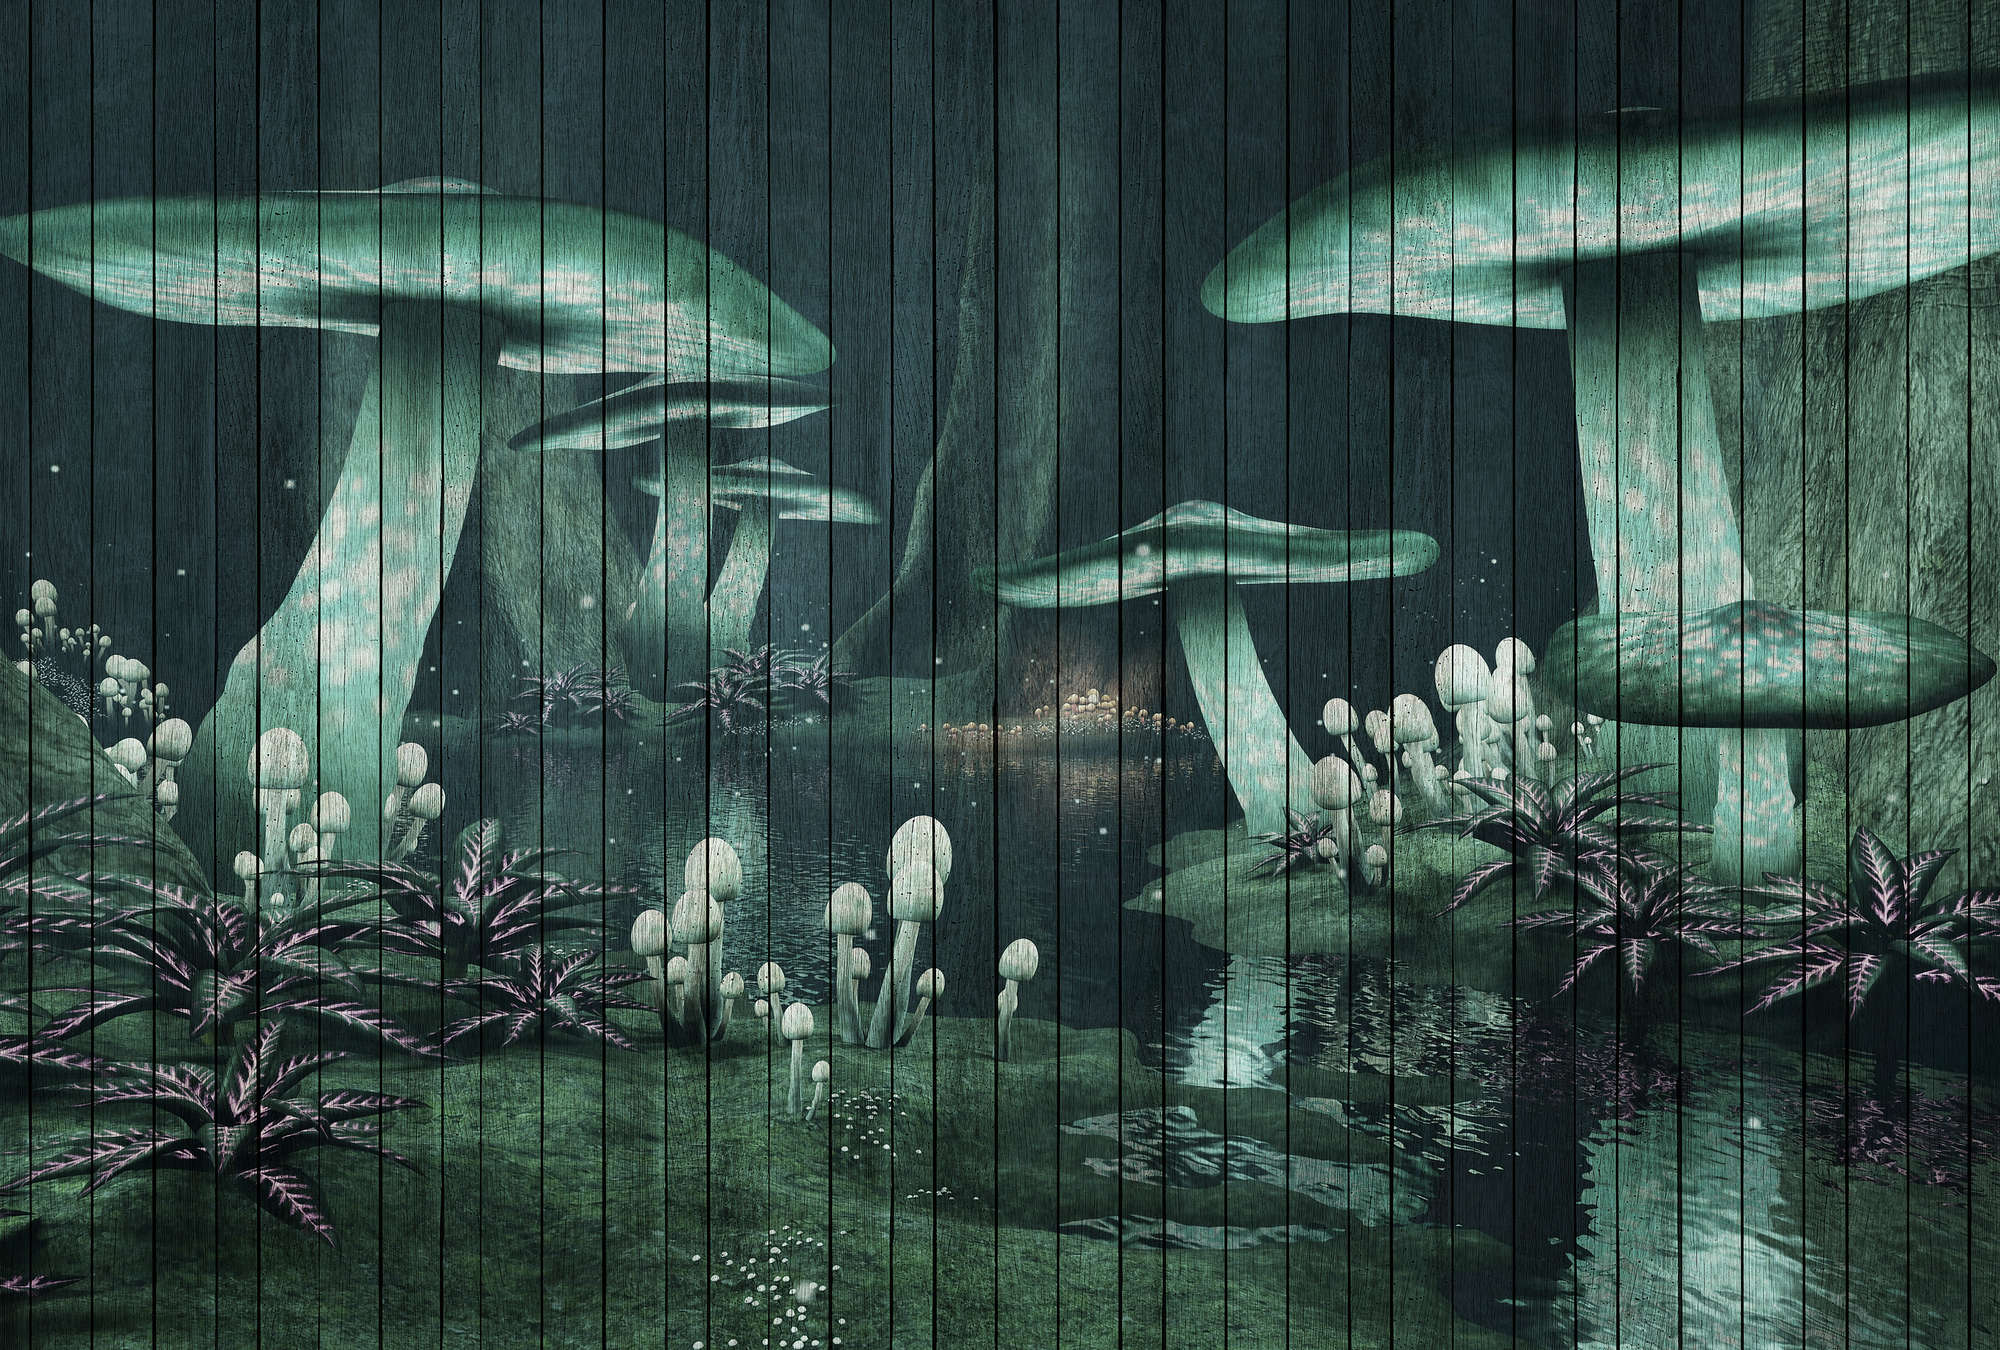             Fantasy 1 - wallpaper enchanted forest with wood look - green | mother-of-pearl smooth fleece
        